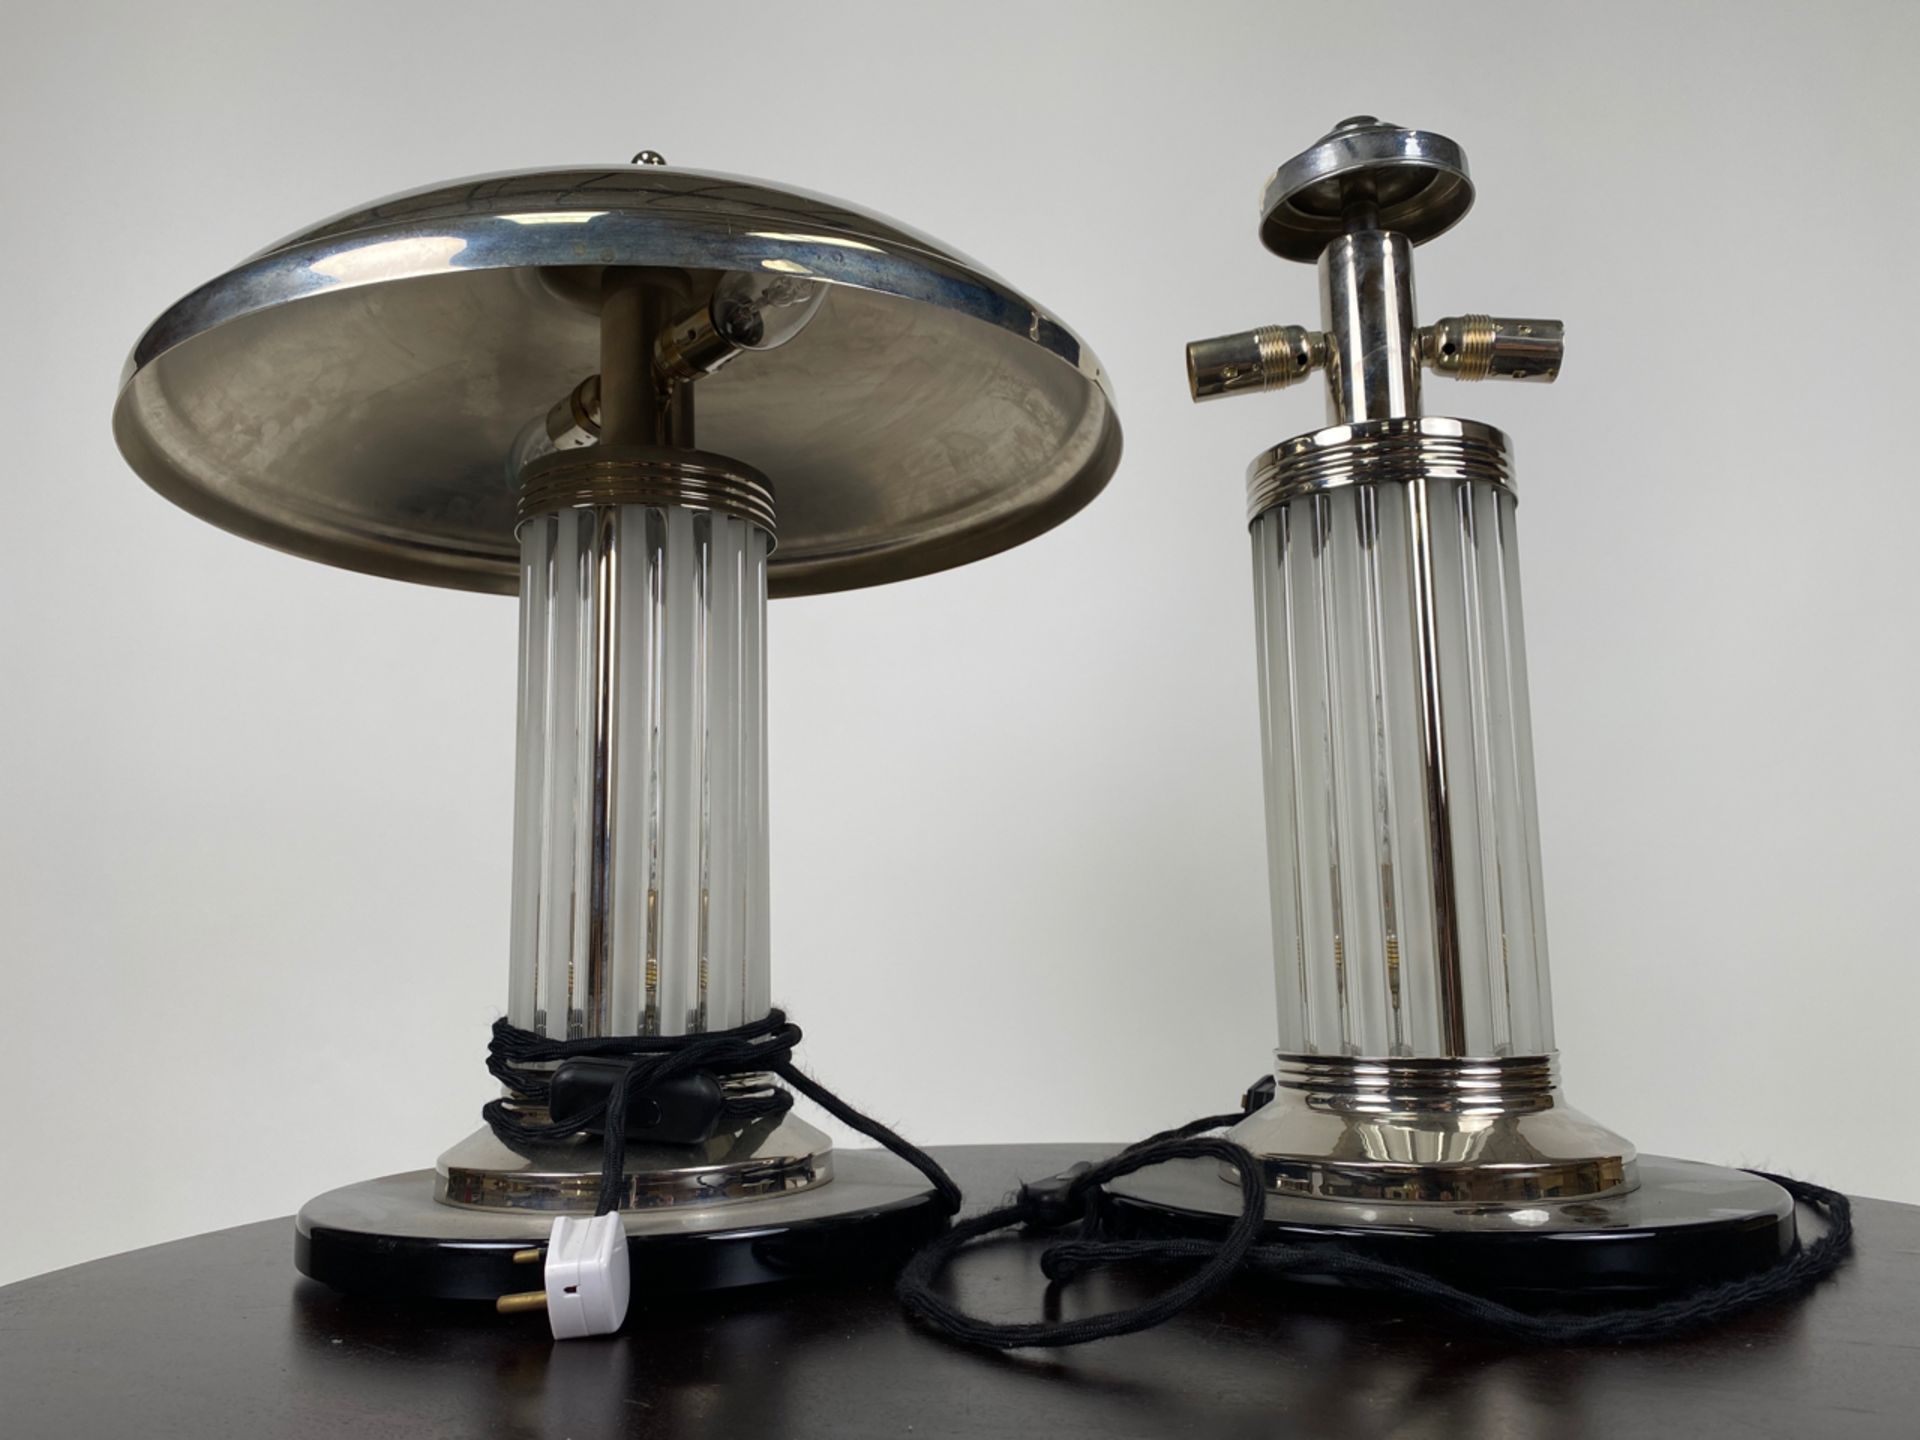 Pair of Art Deco Style Glass Table Lamps